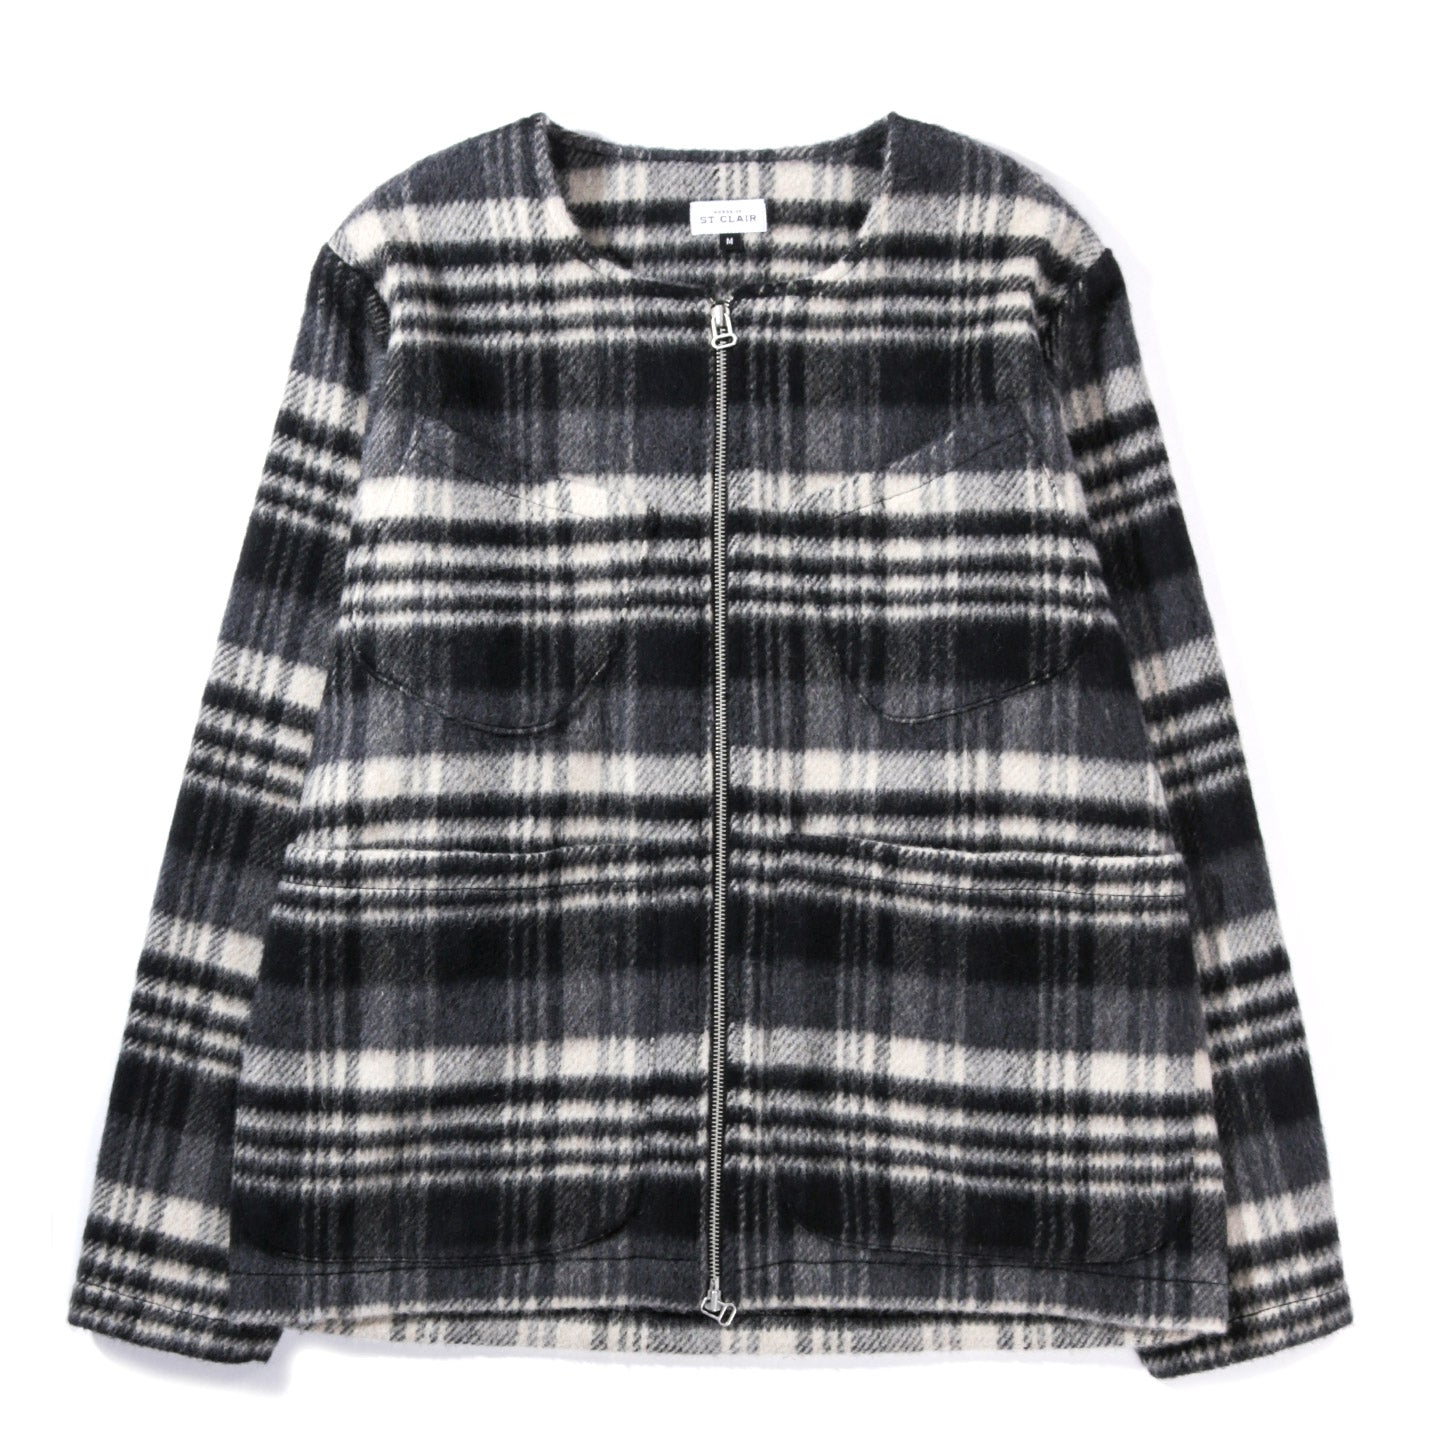 HOUSE OF ST. CLAIR PLAID LINCOLN JACKET